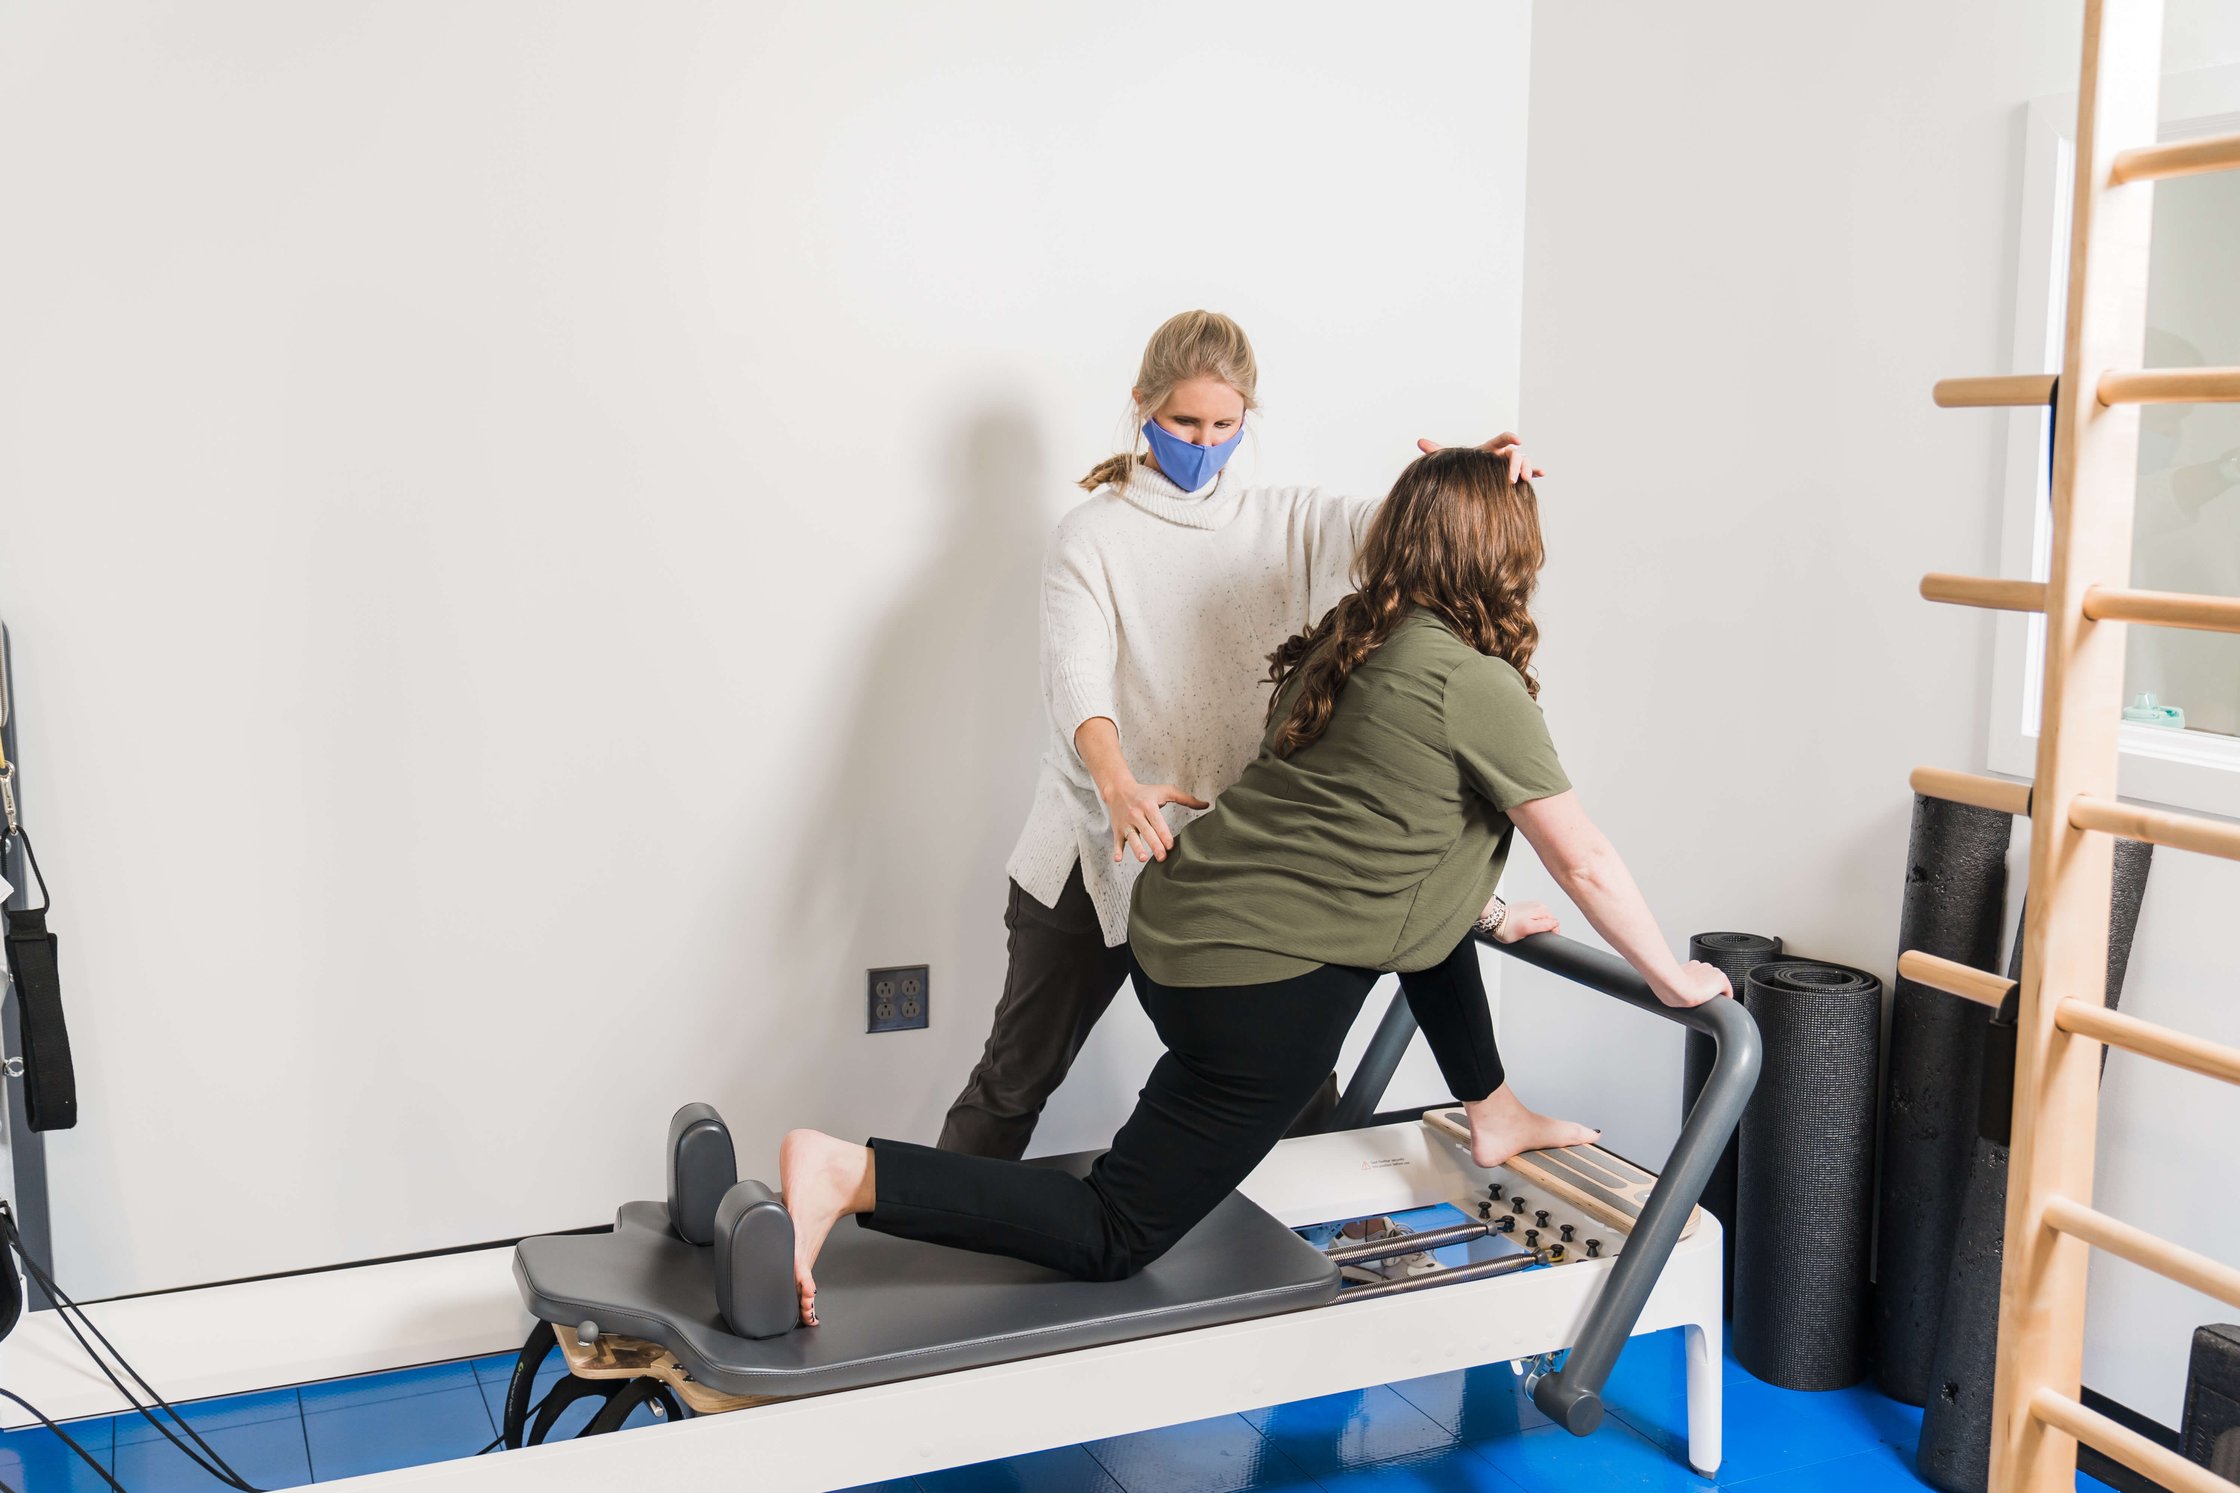 Mat vs Reformer Pilates: Which Should You Choose?